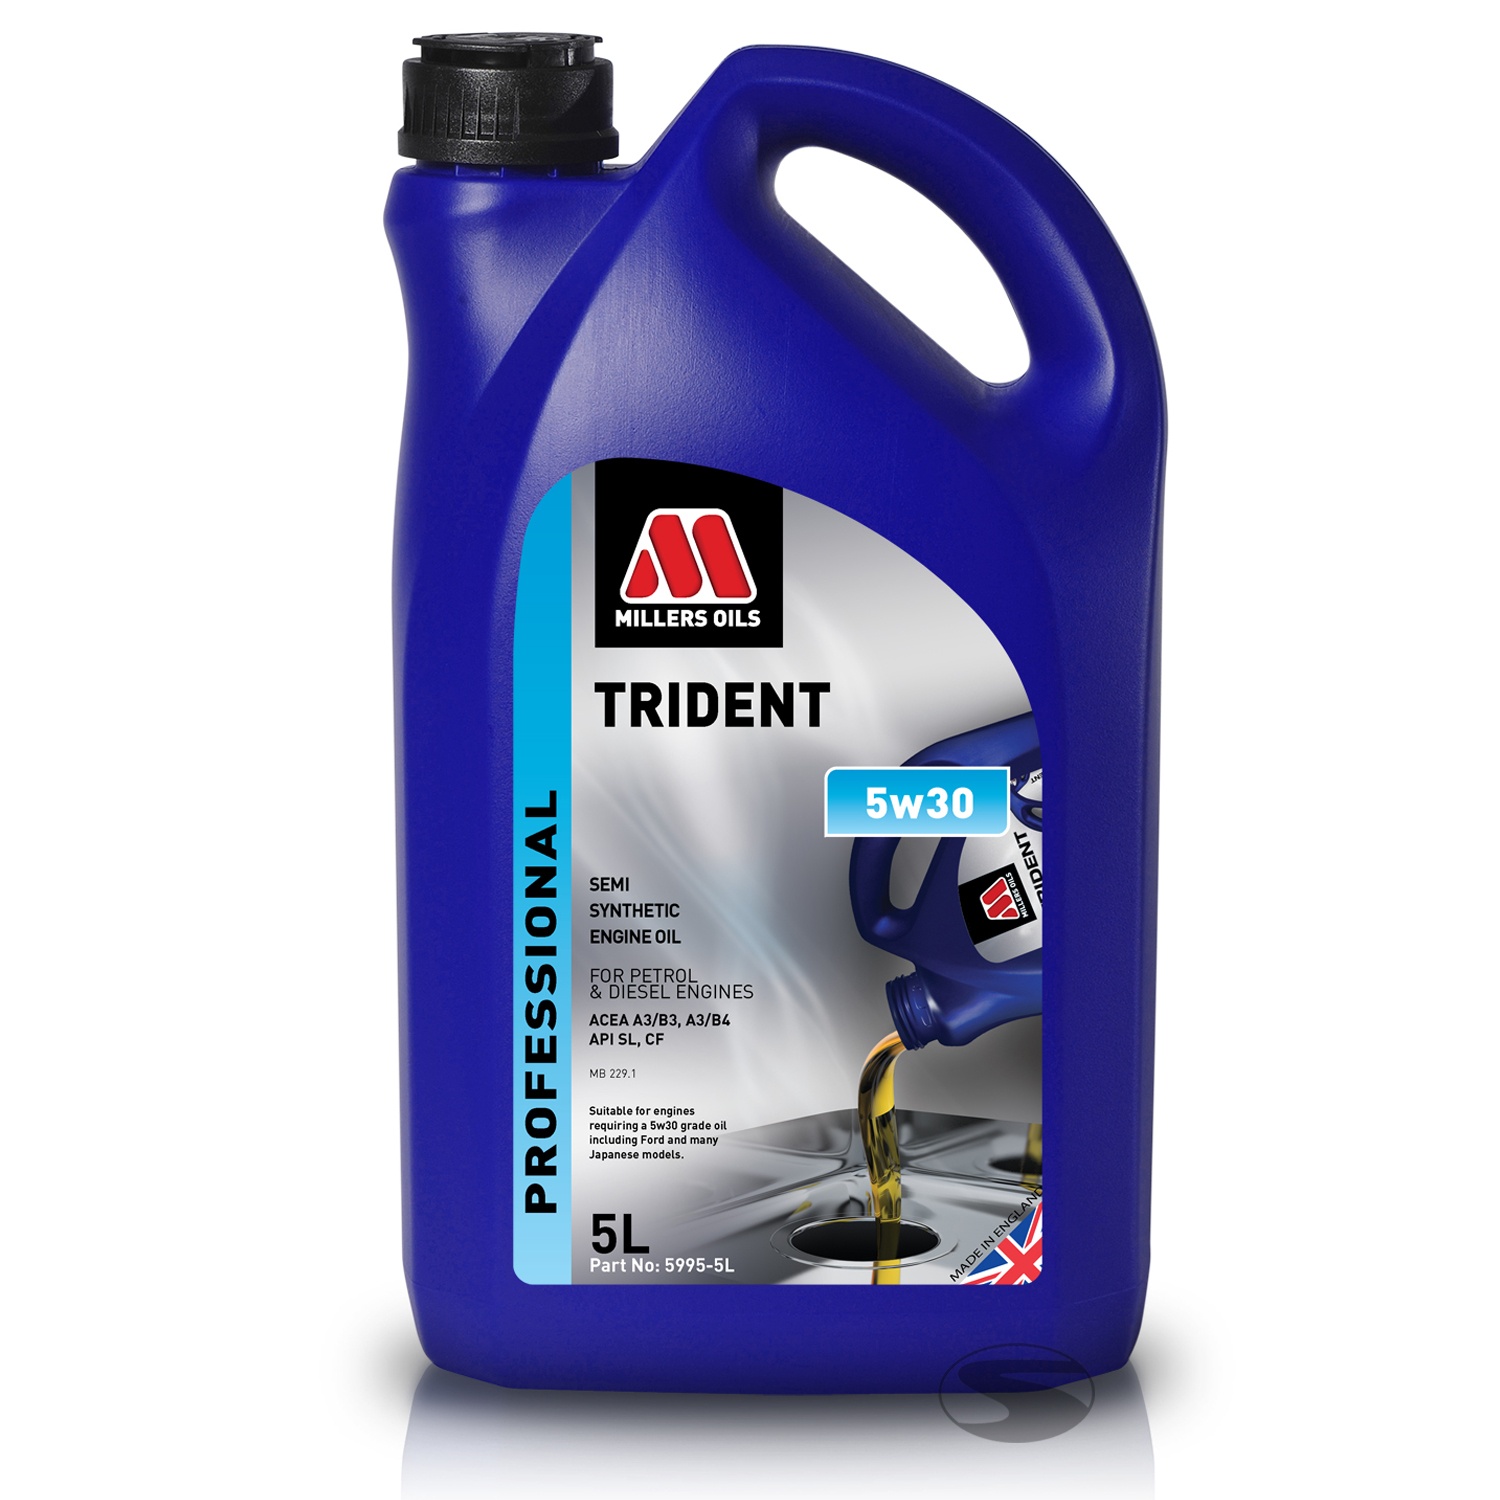 Millers Oils Trident 5W30 Semi Synthetic_5 Liter_150187